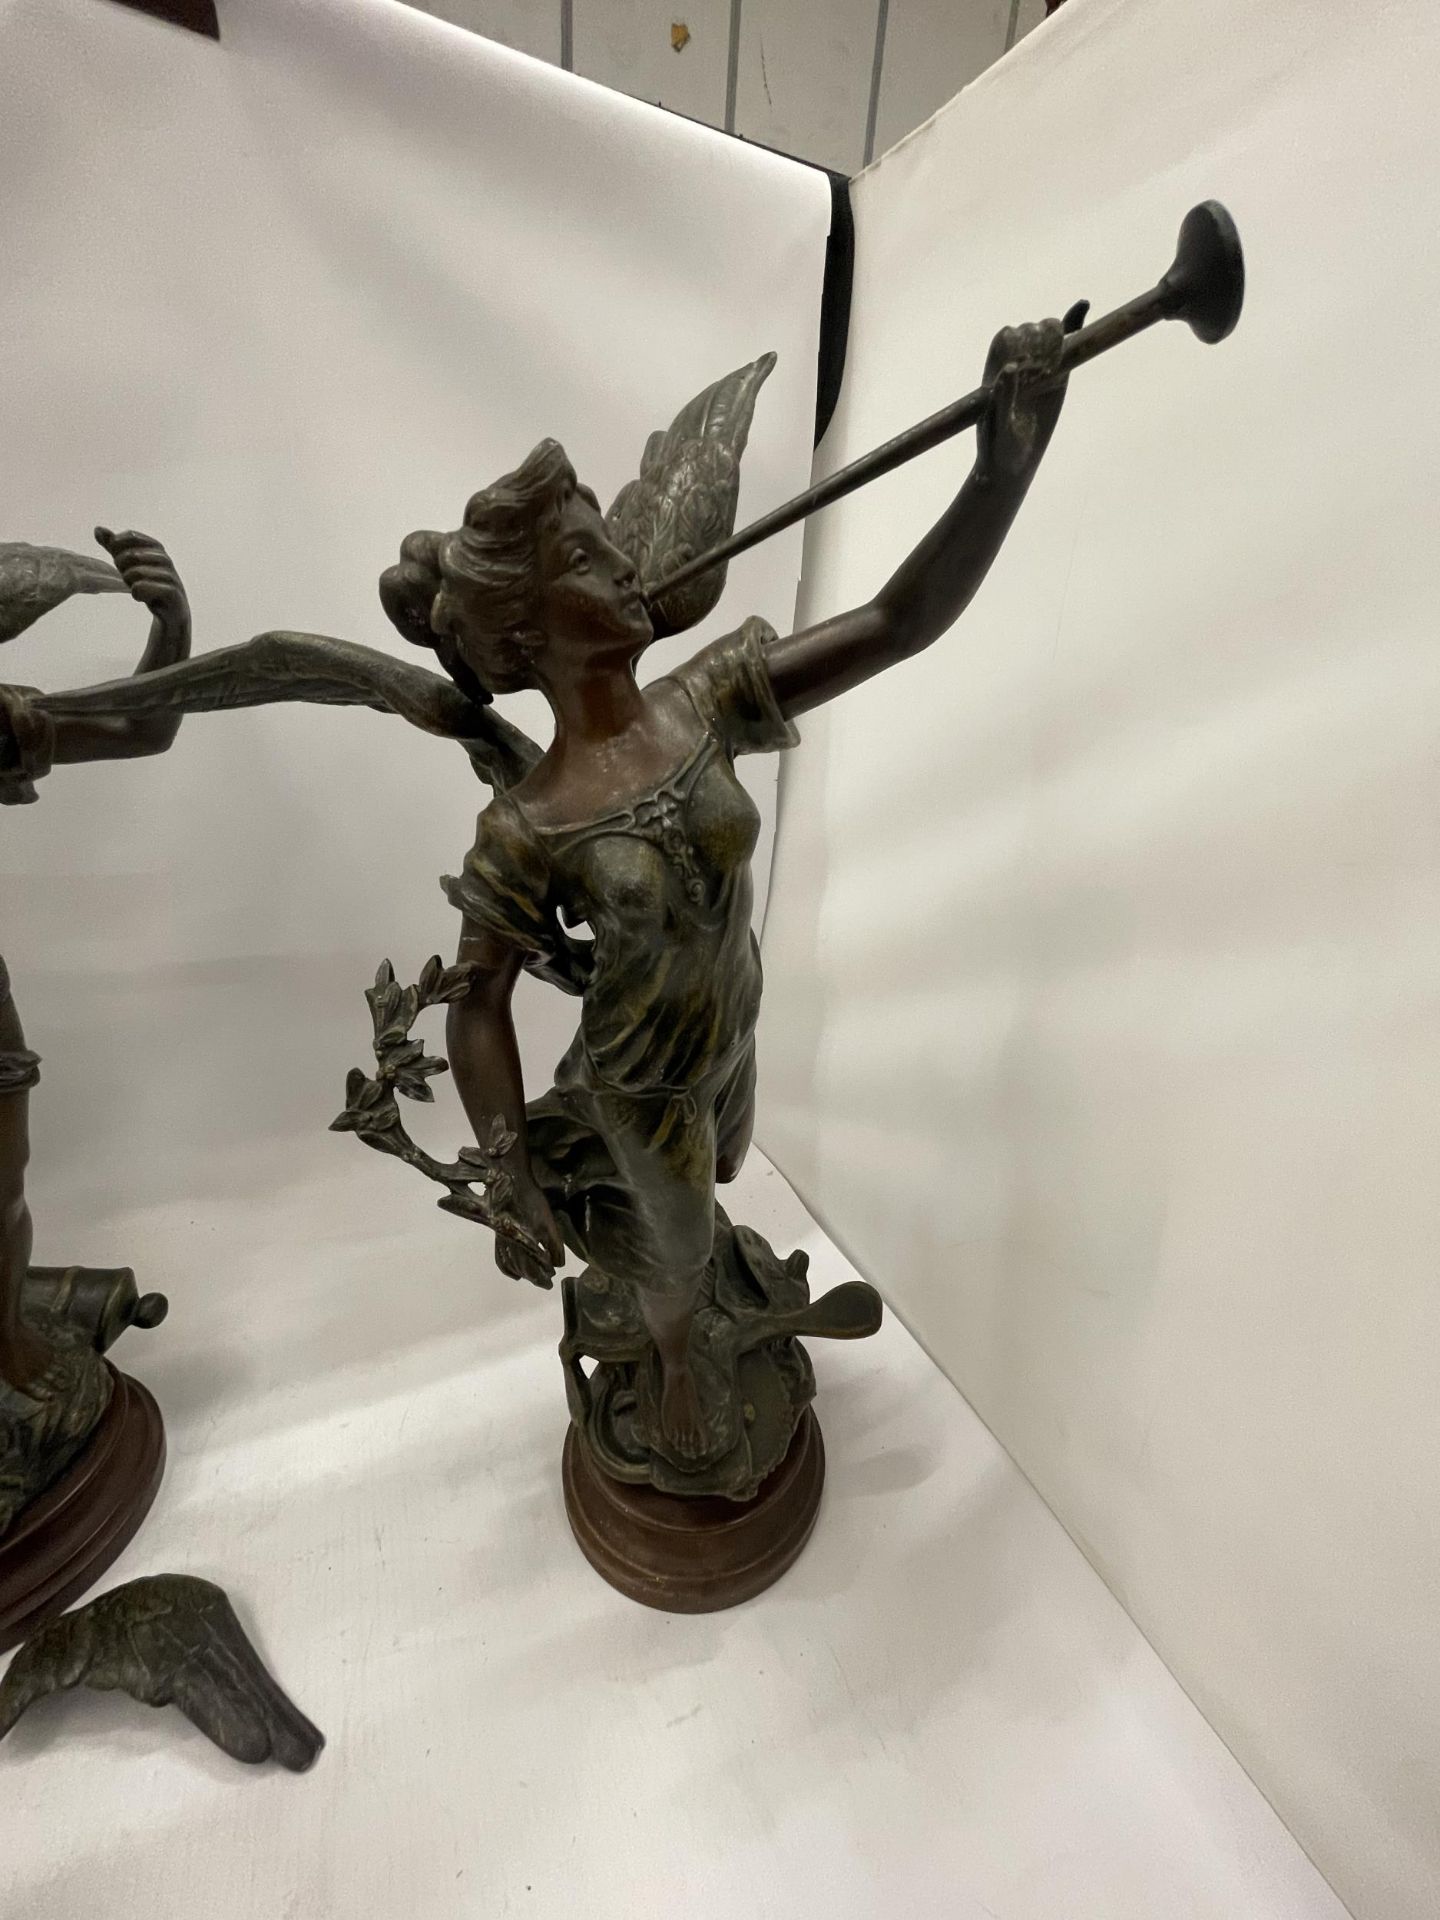 A PAIR OF VINGTAGE SPELTER CHERUB FIGURES, SIGNED (ONE WING A/F) - Image 2 of 6